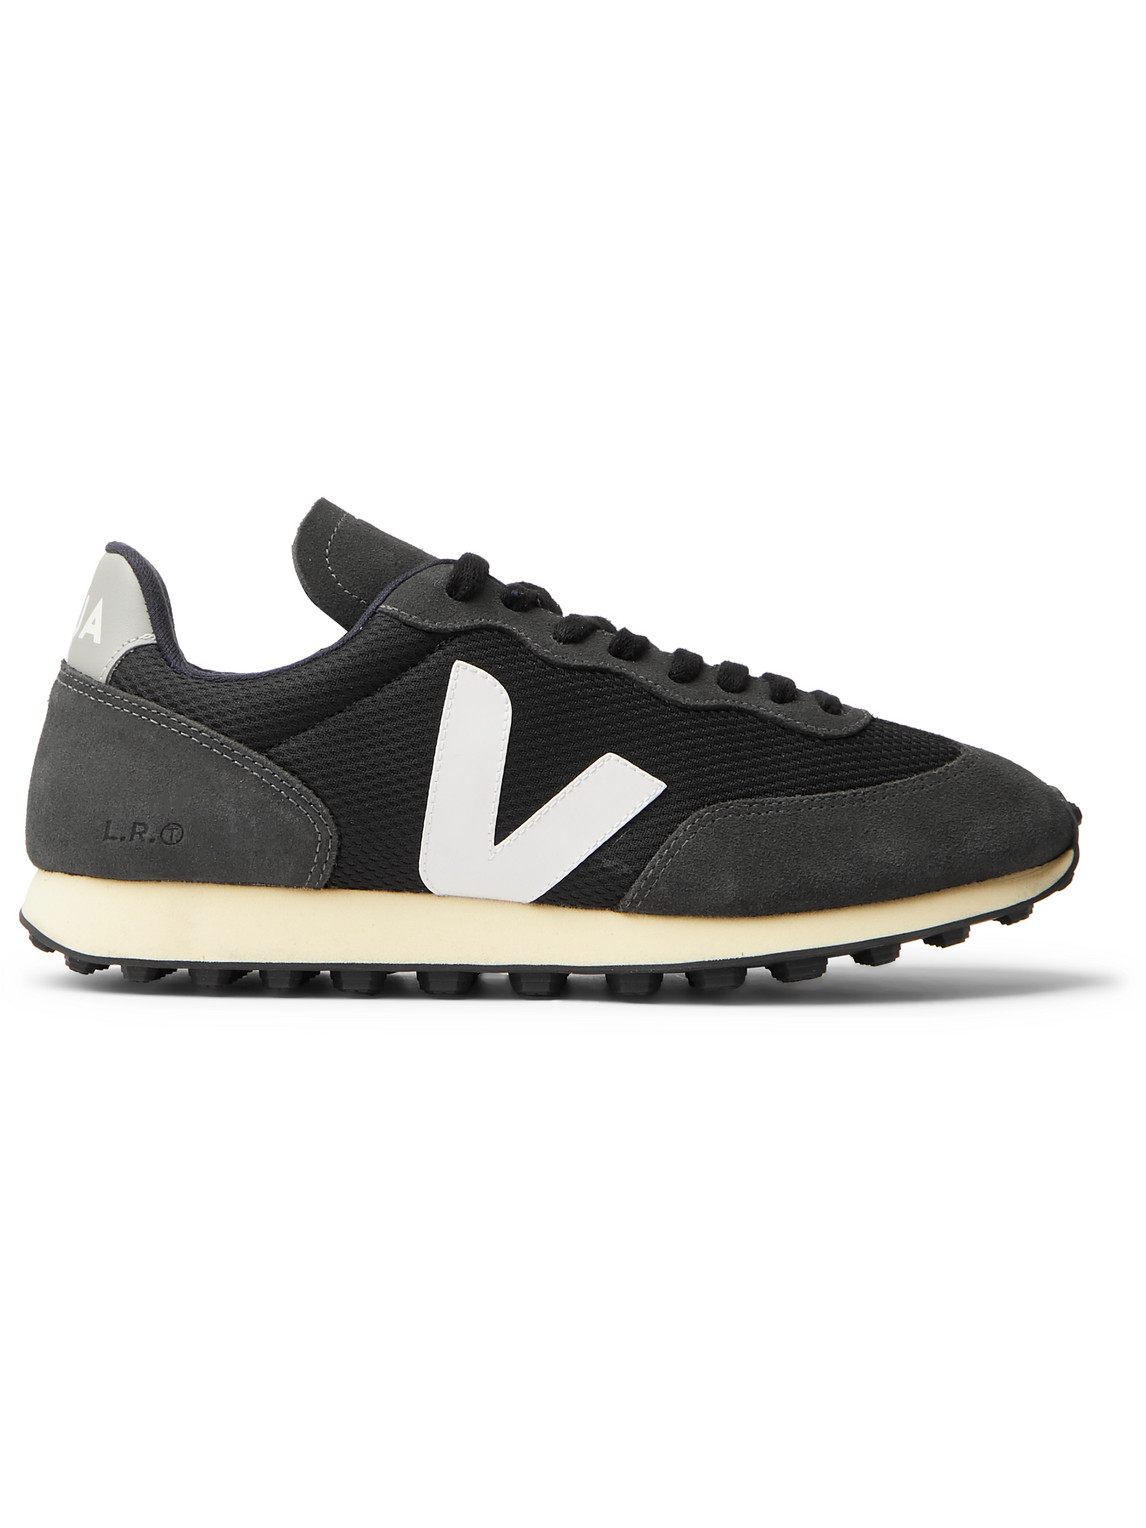 Veja Rio Branco Leather and Rubber-Trimmed Alveomesh and Suede Sneakers